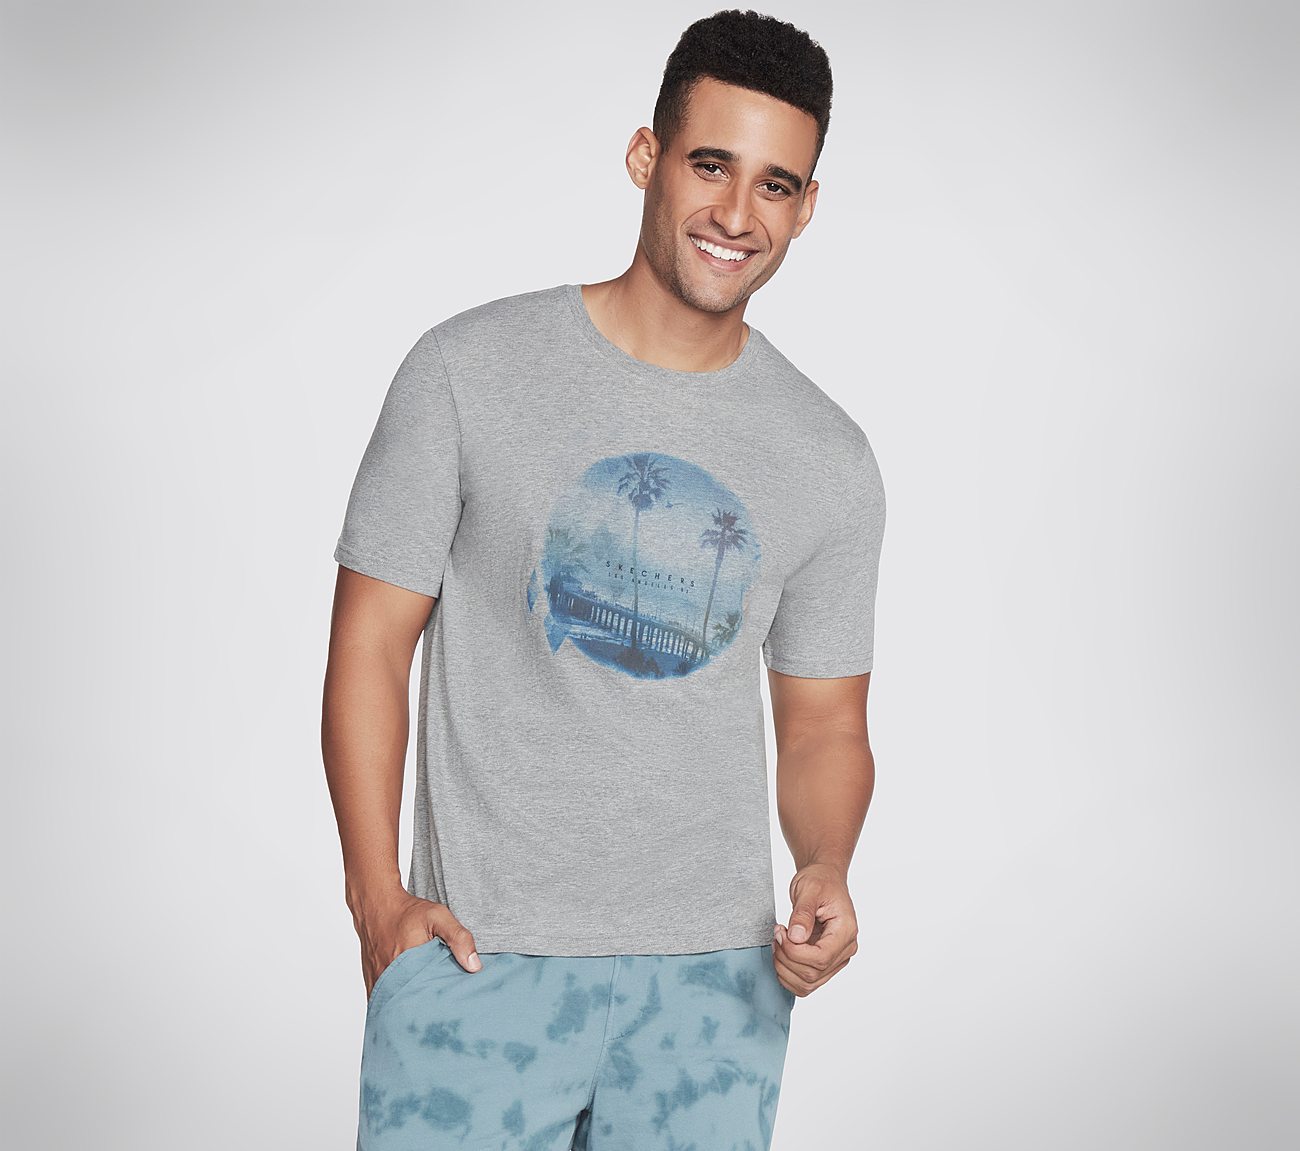 SKECHERS PIER TEE, LIGHT GREY Apparels Lateral View